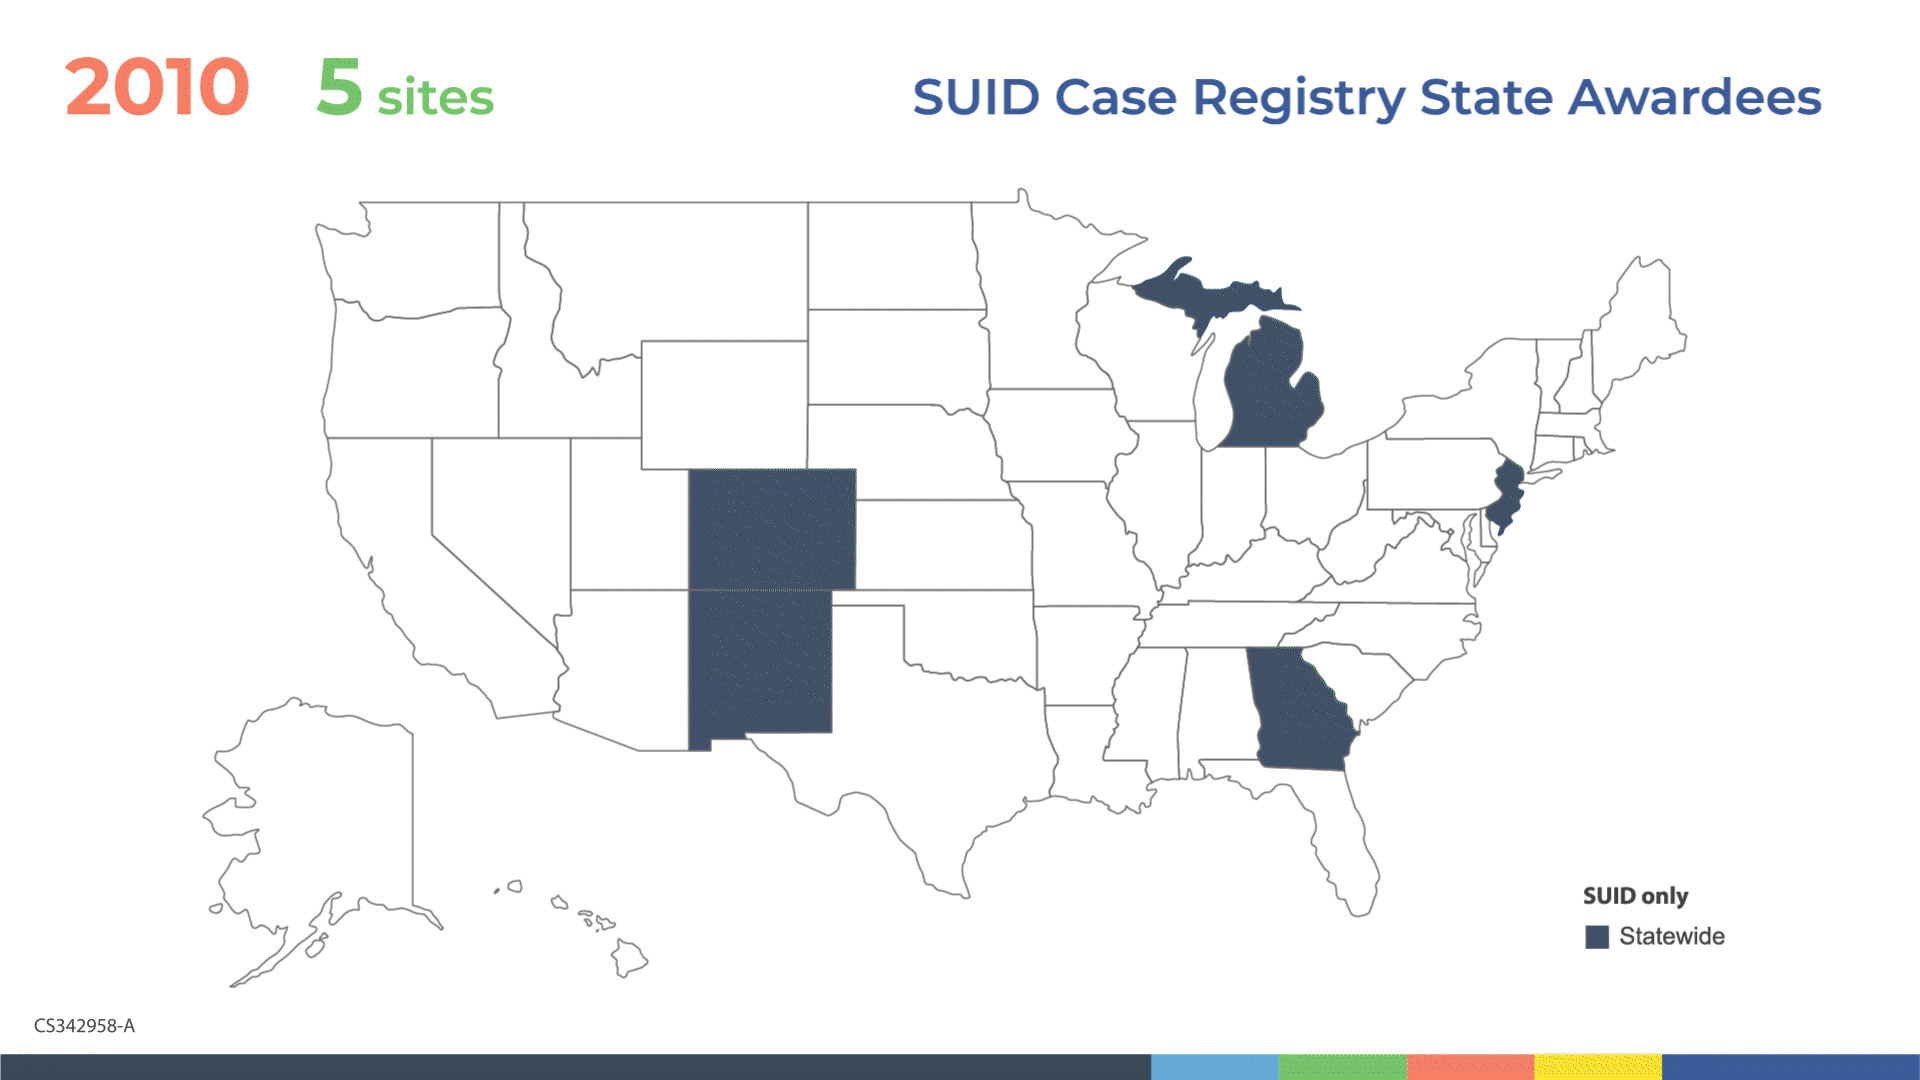 U.S. map shows growth of participating sites from 5 in 2010 to 32 in 2023, 2/5 of all U.S. SUID cases.